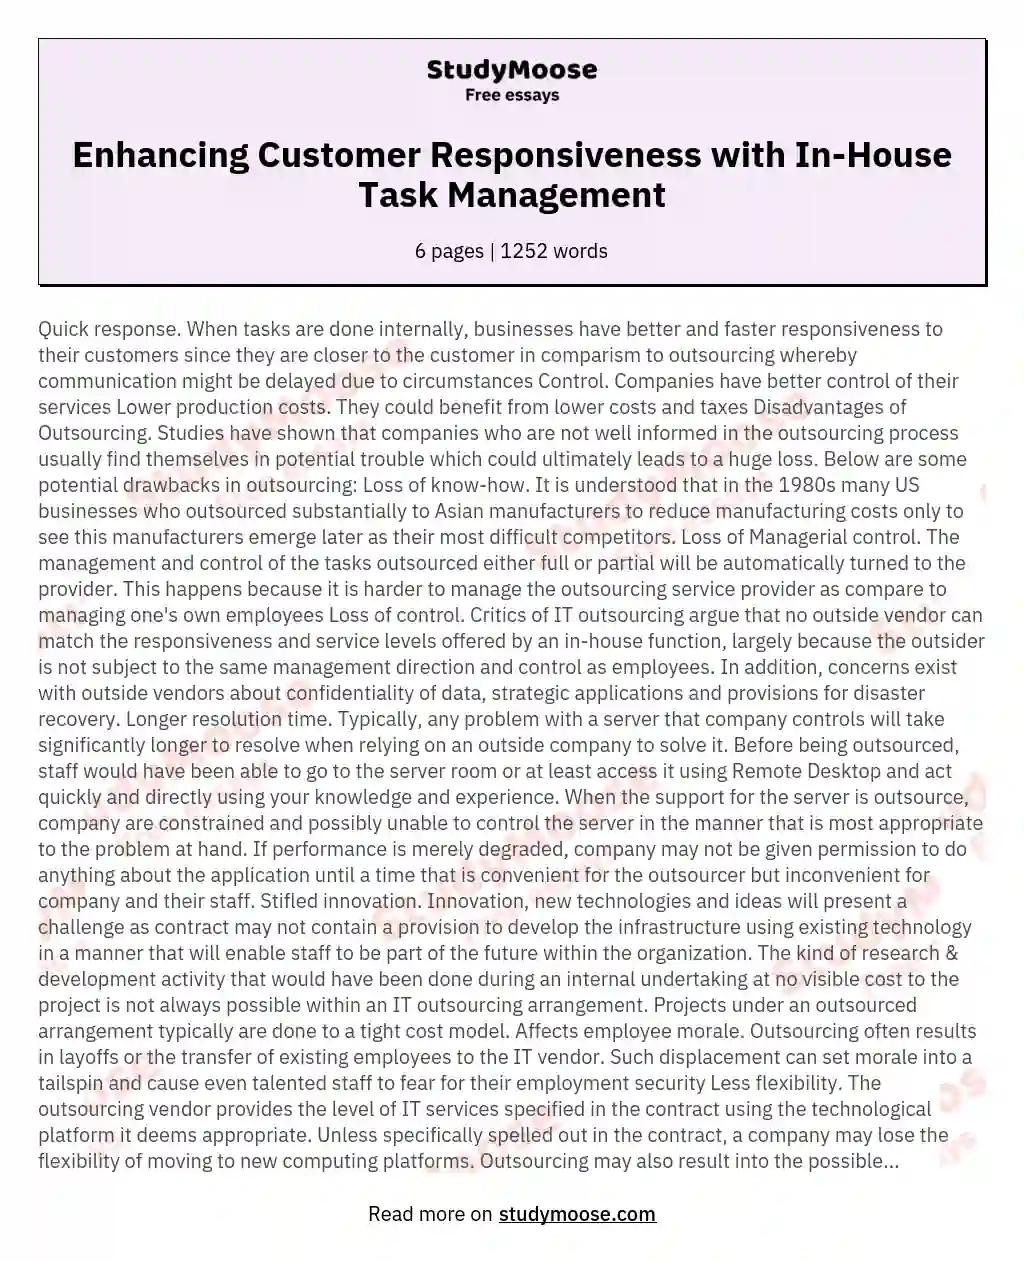 Enhancing Customer Responsiveness with In-House Task Management essay